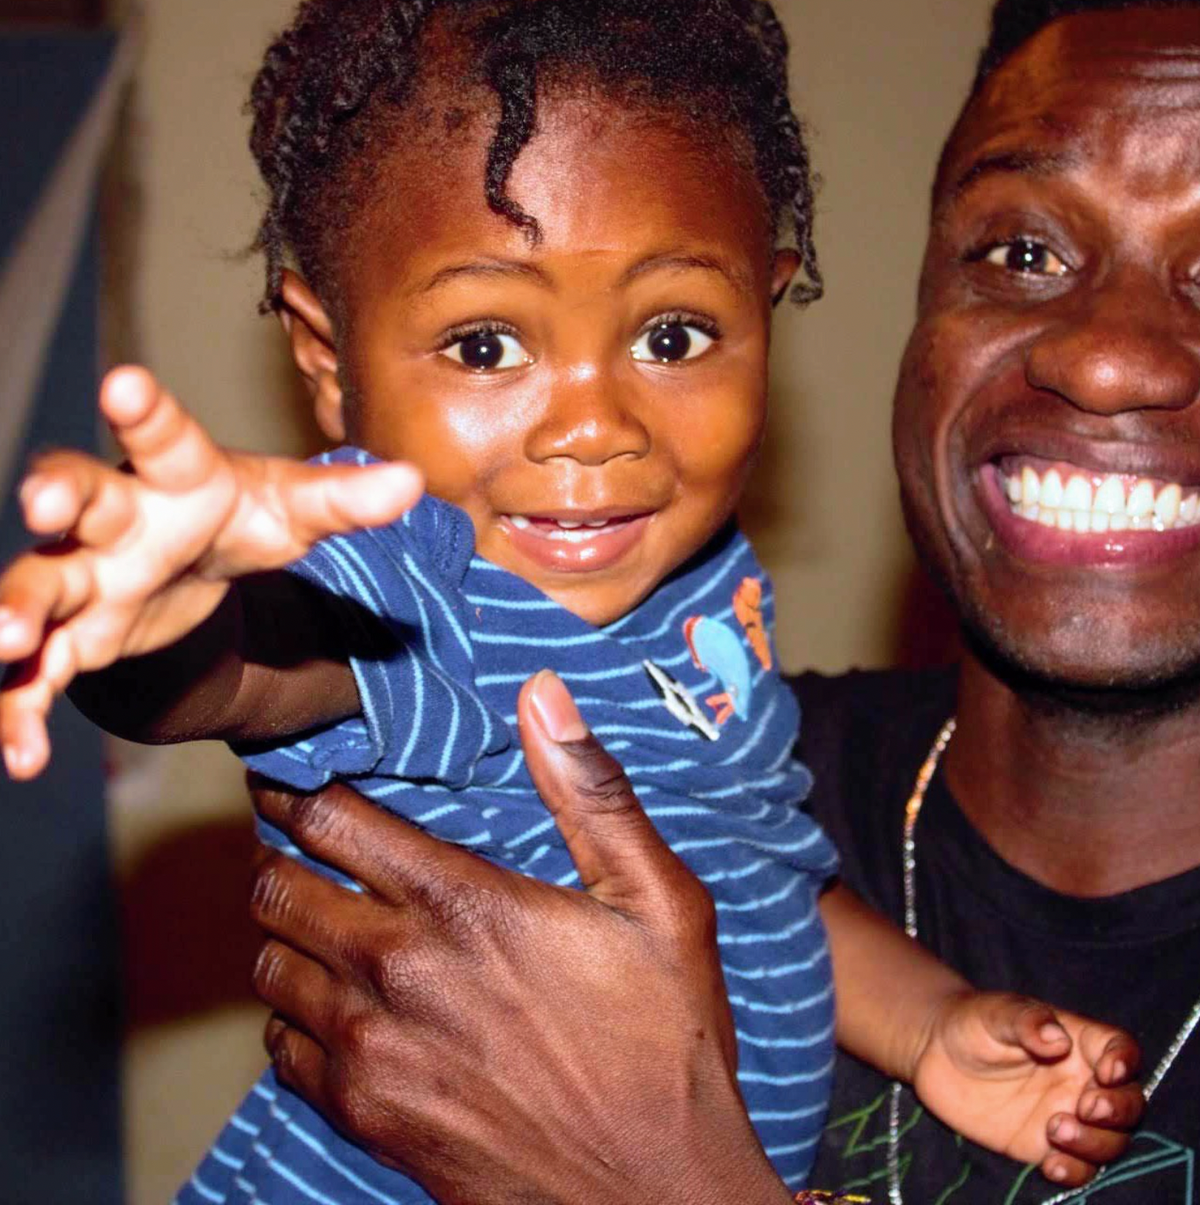 Texas university student adopts infant he found in the trash in Haiti